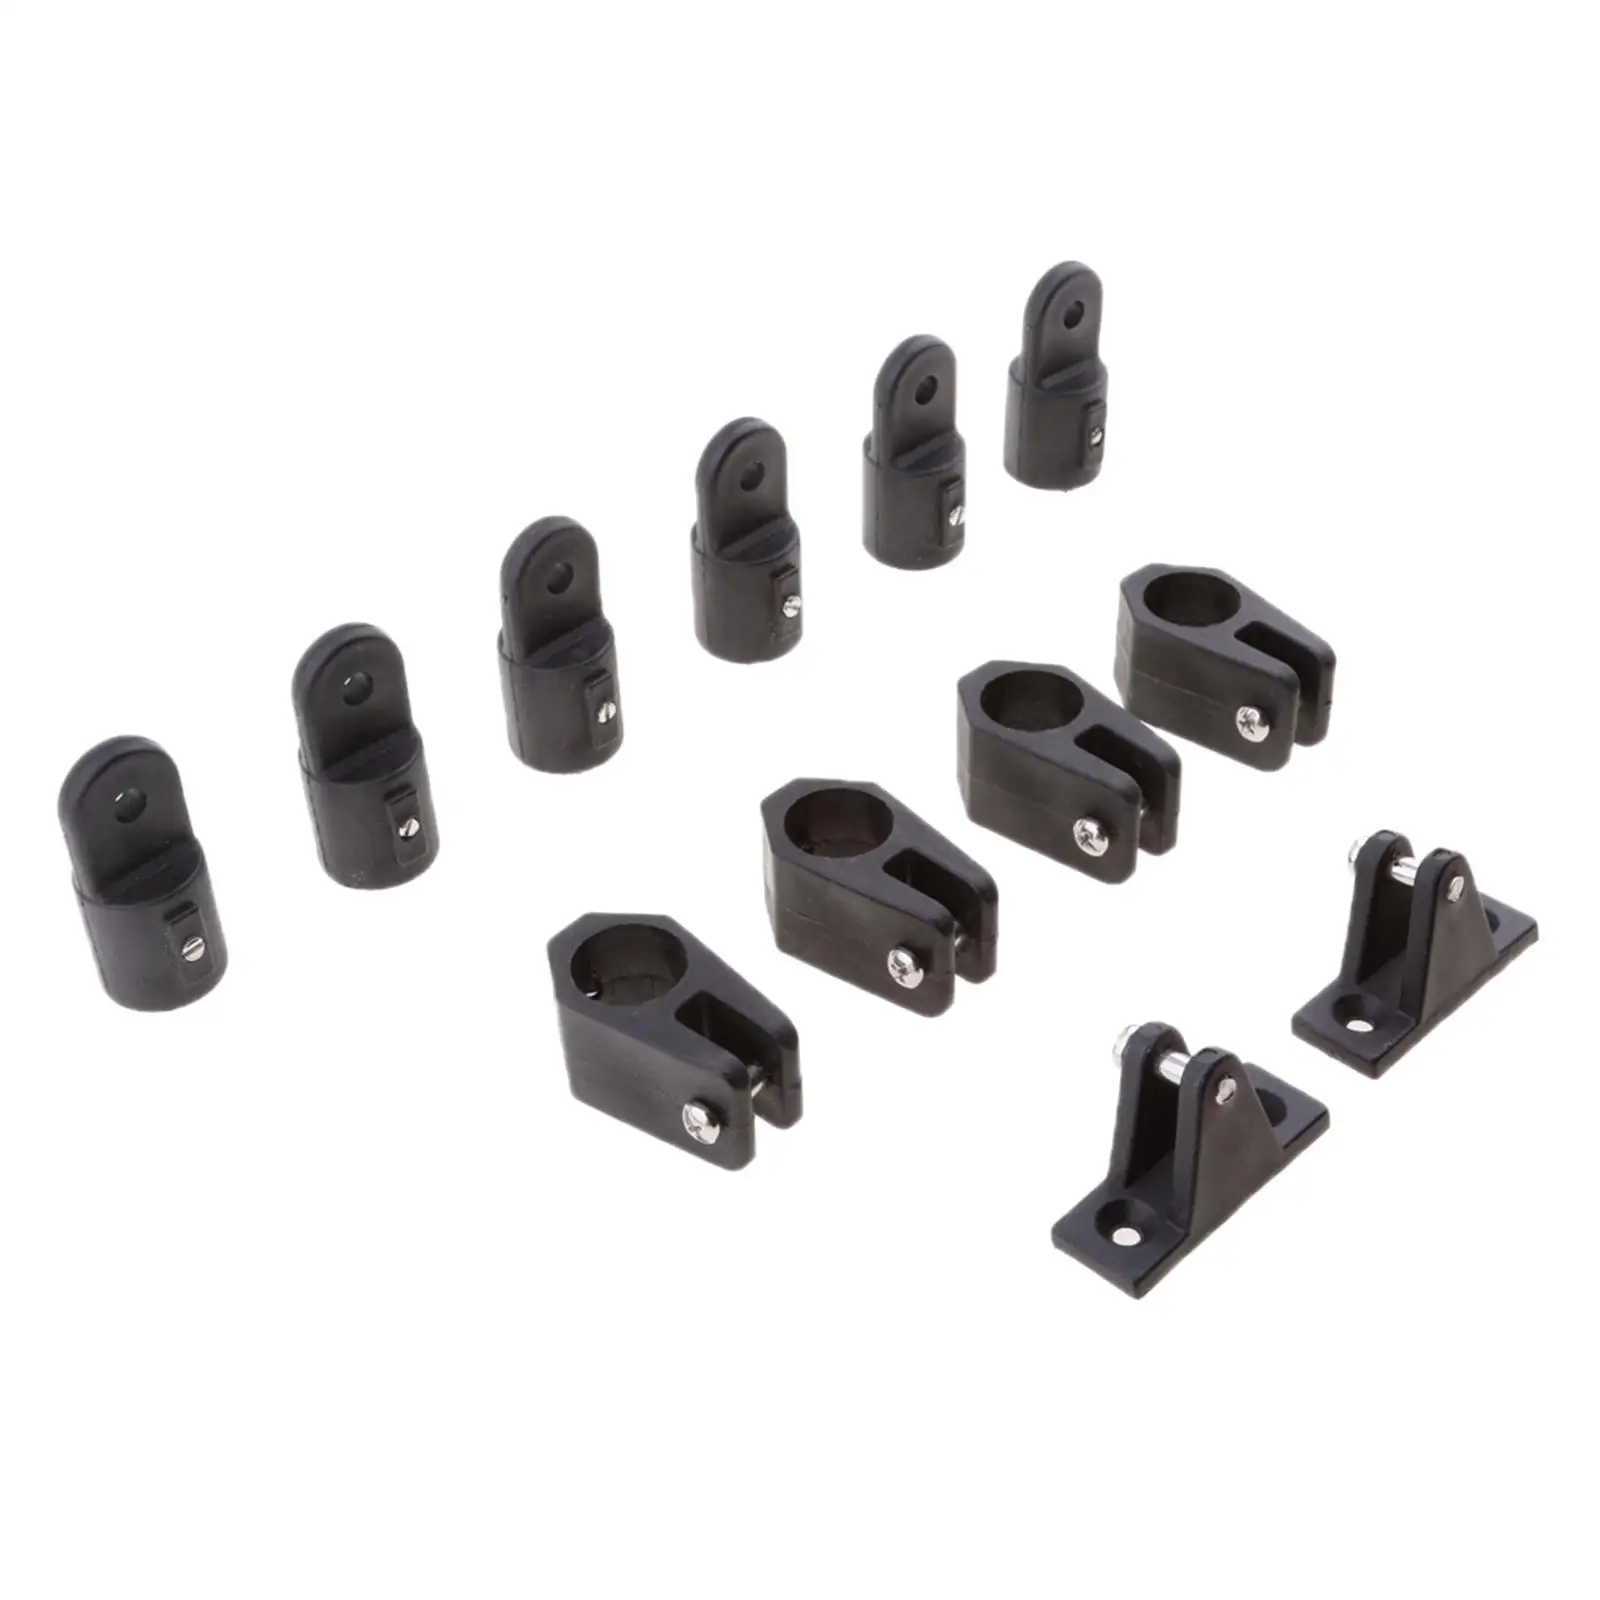 12 PCS Nylon Canopy 3 Bow Boat Top Cover  Fittings  Set 7/8 inch 22mm  RV - Black